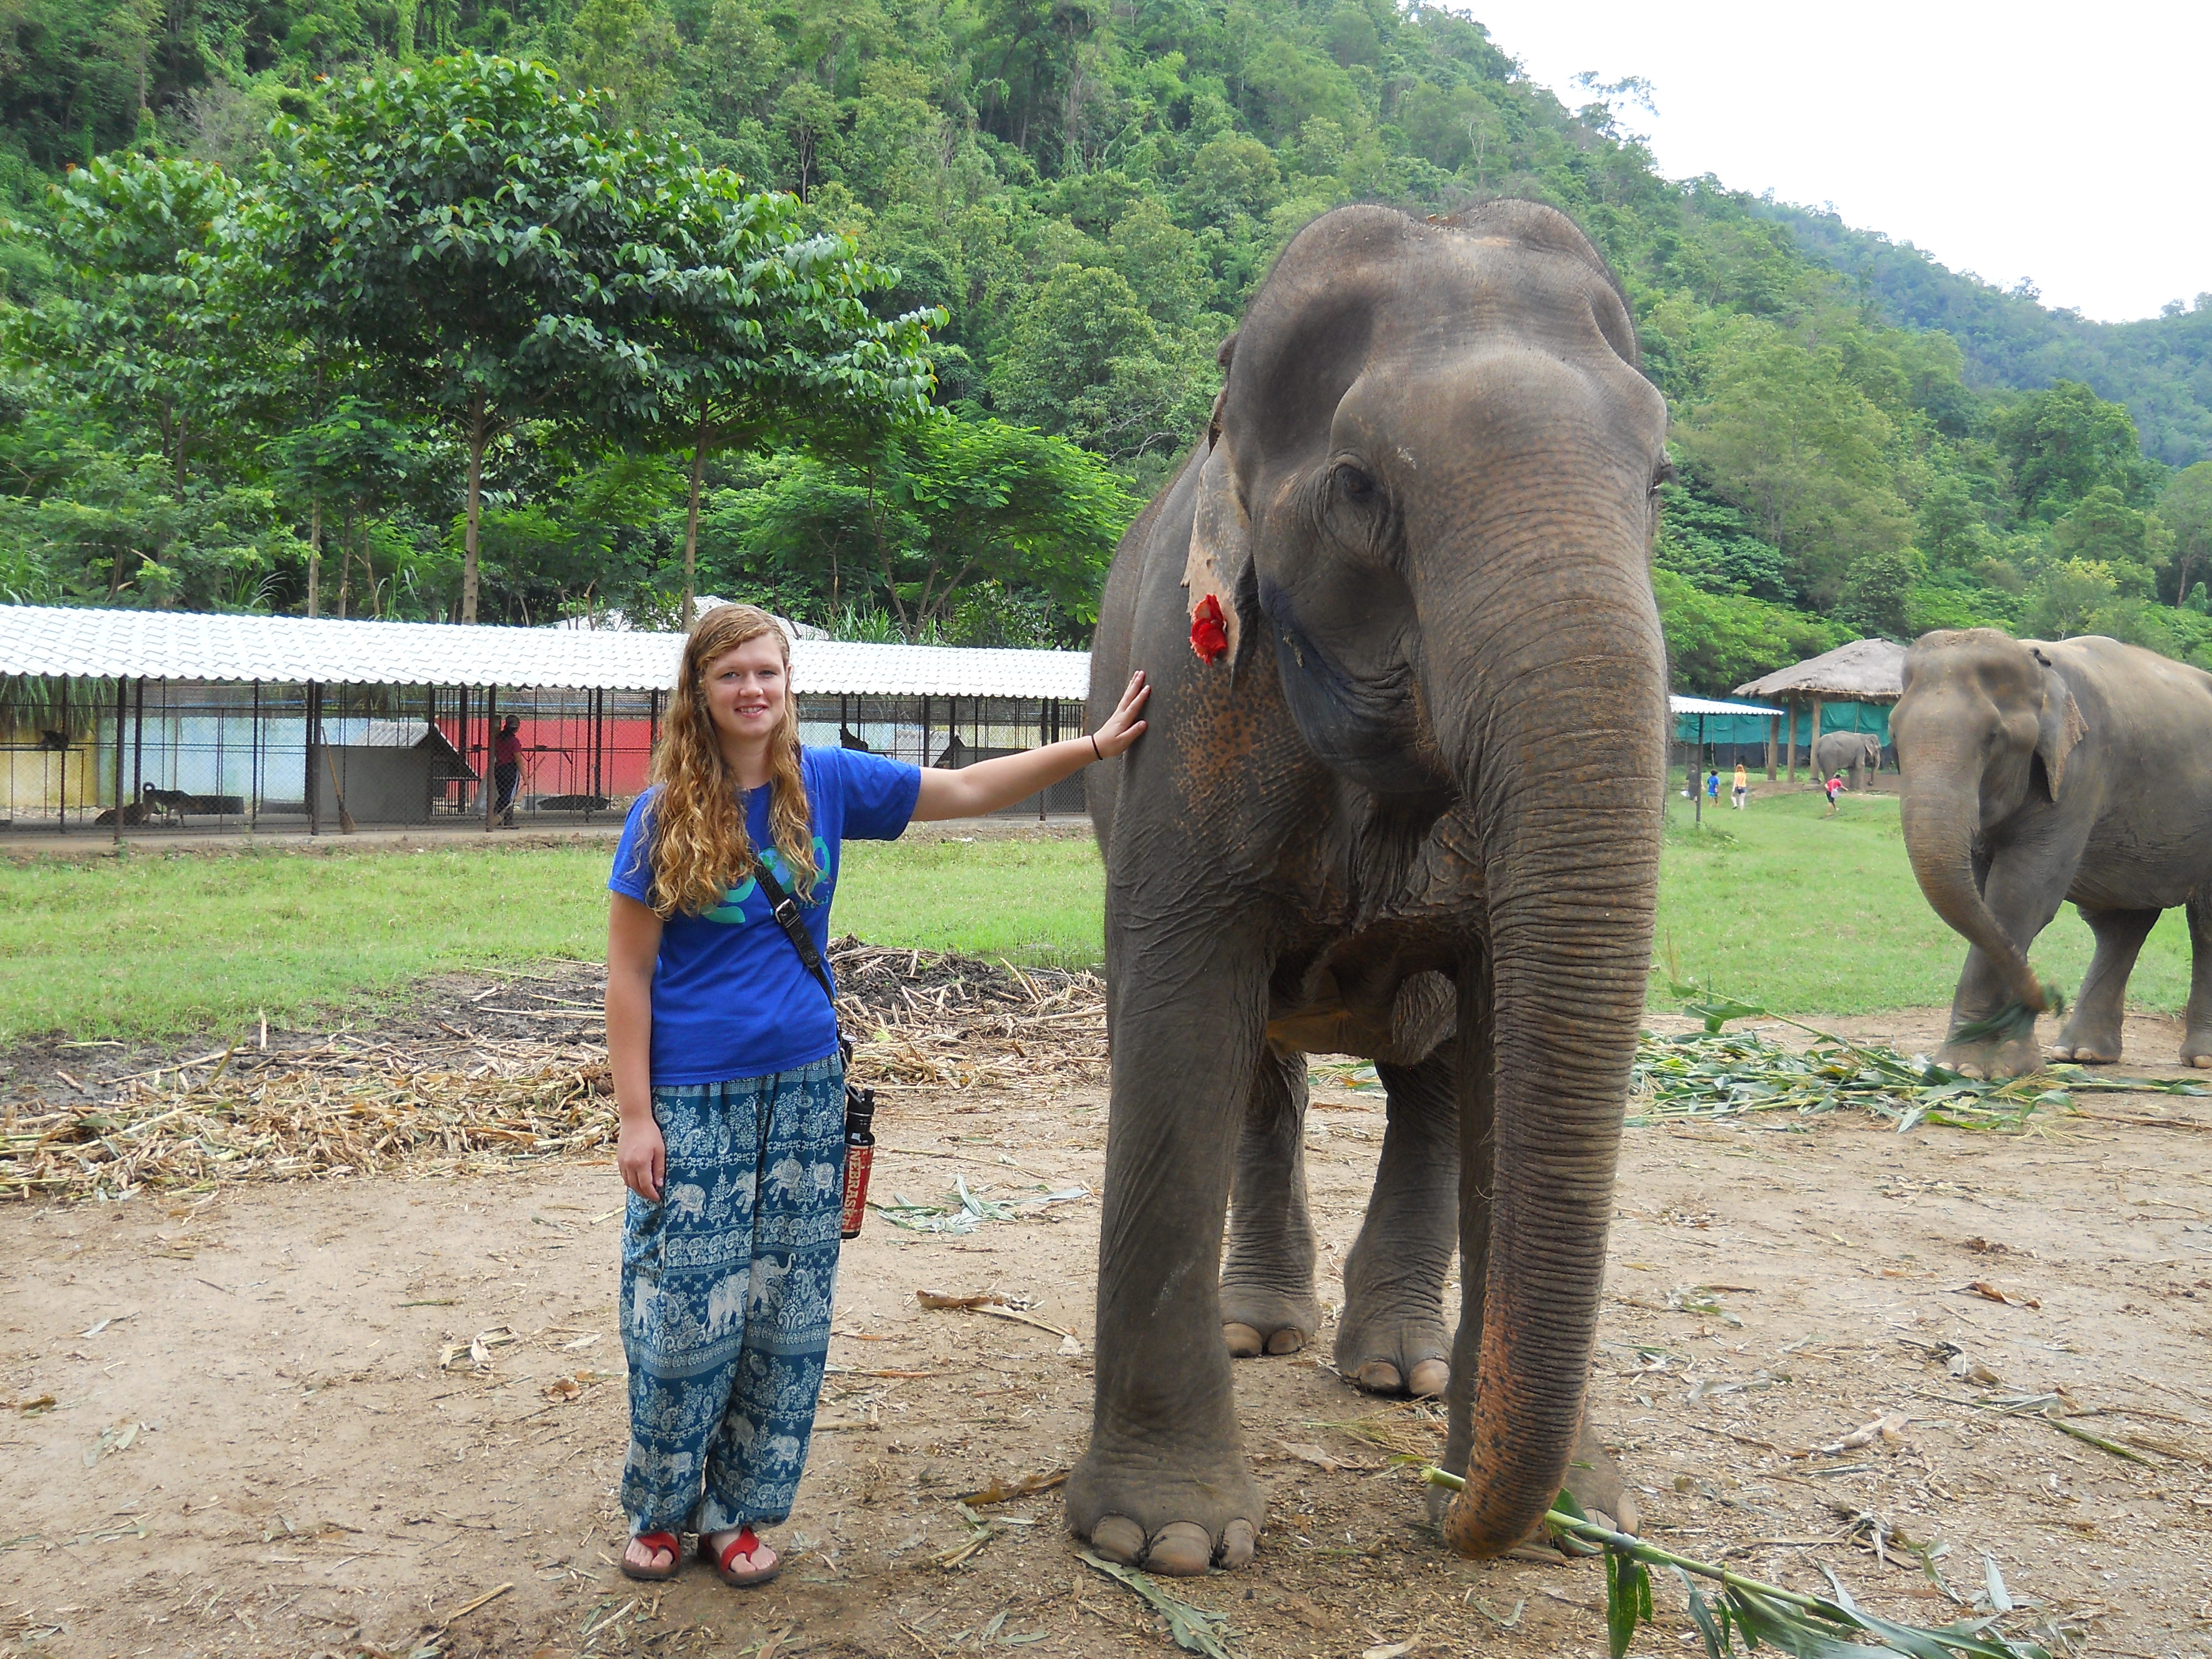 McKenzie Beals, 2015 graduate of NCTA, gained hands-on experience with rescue elephants as part of her experience in Thailand  (Photo © 2016 Loop Abroad)